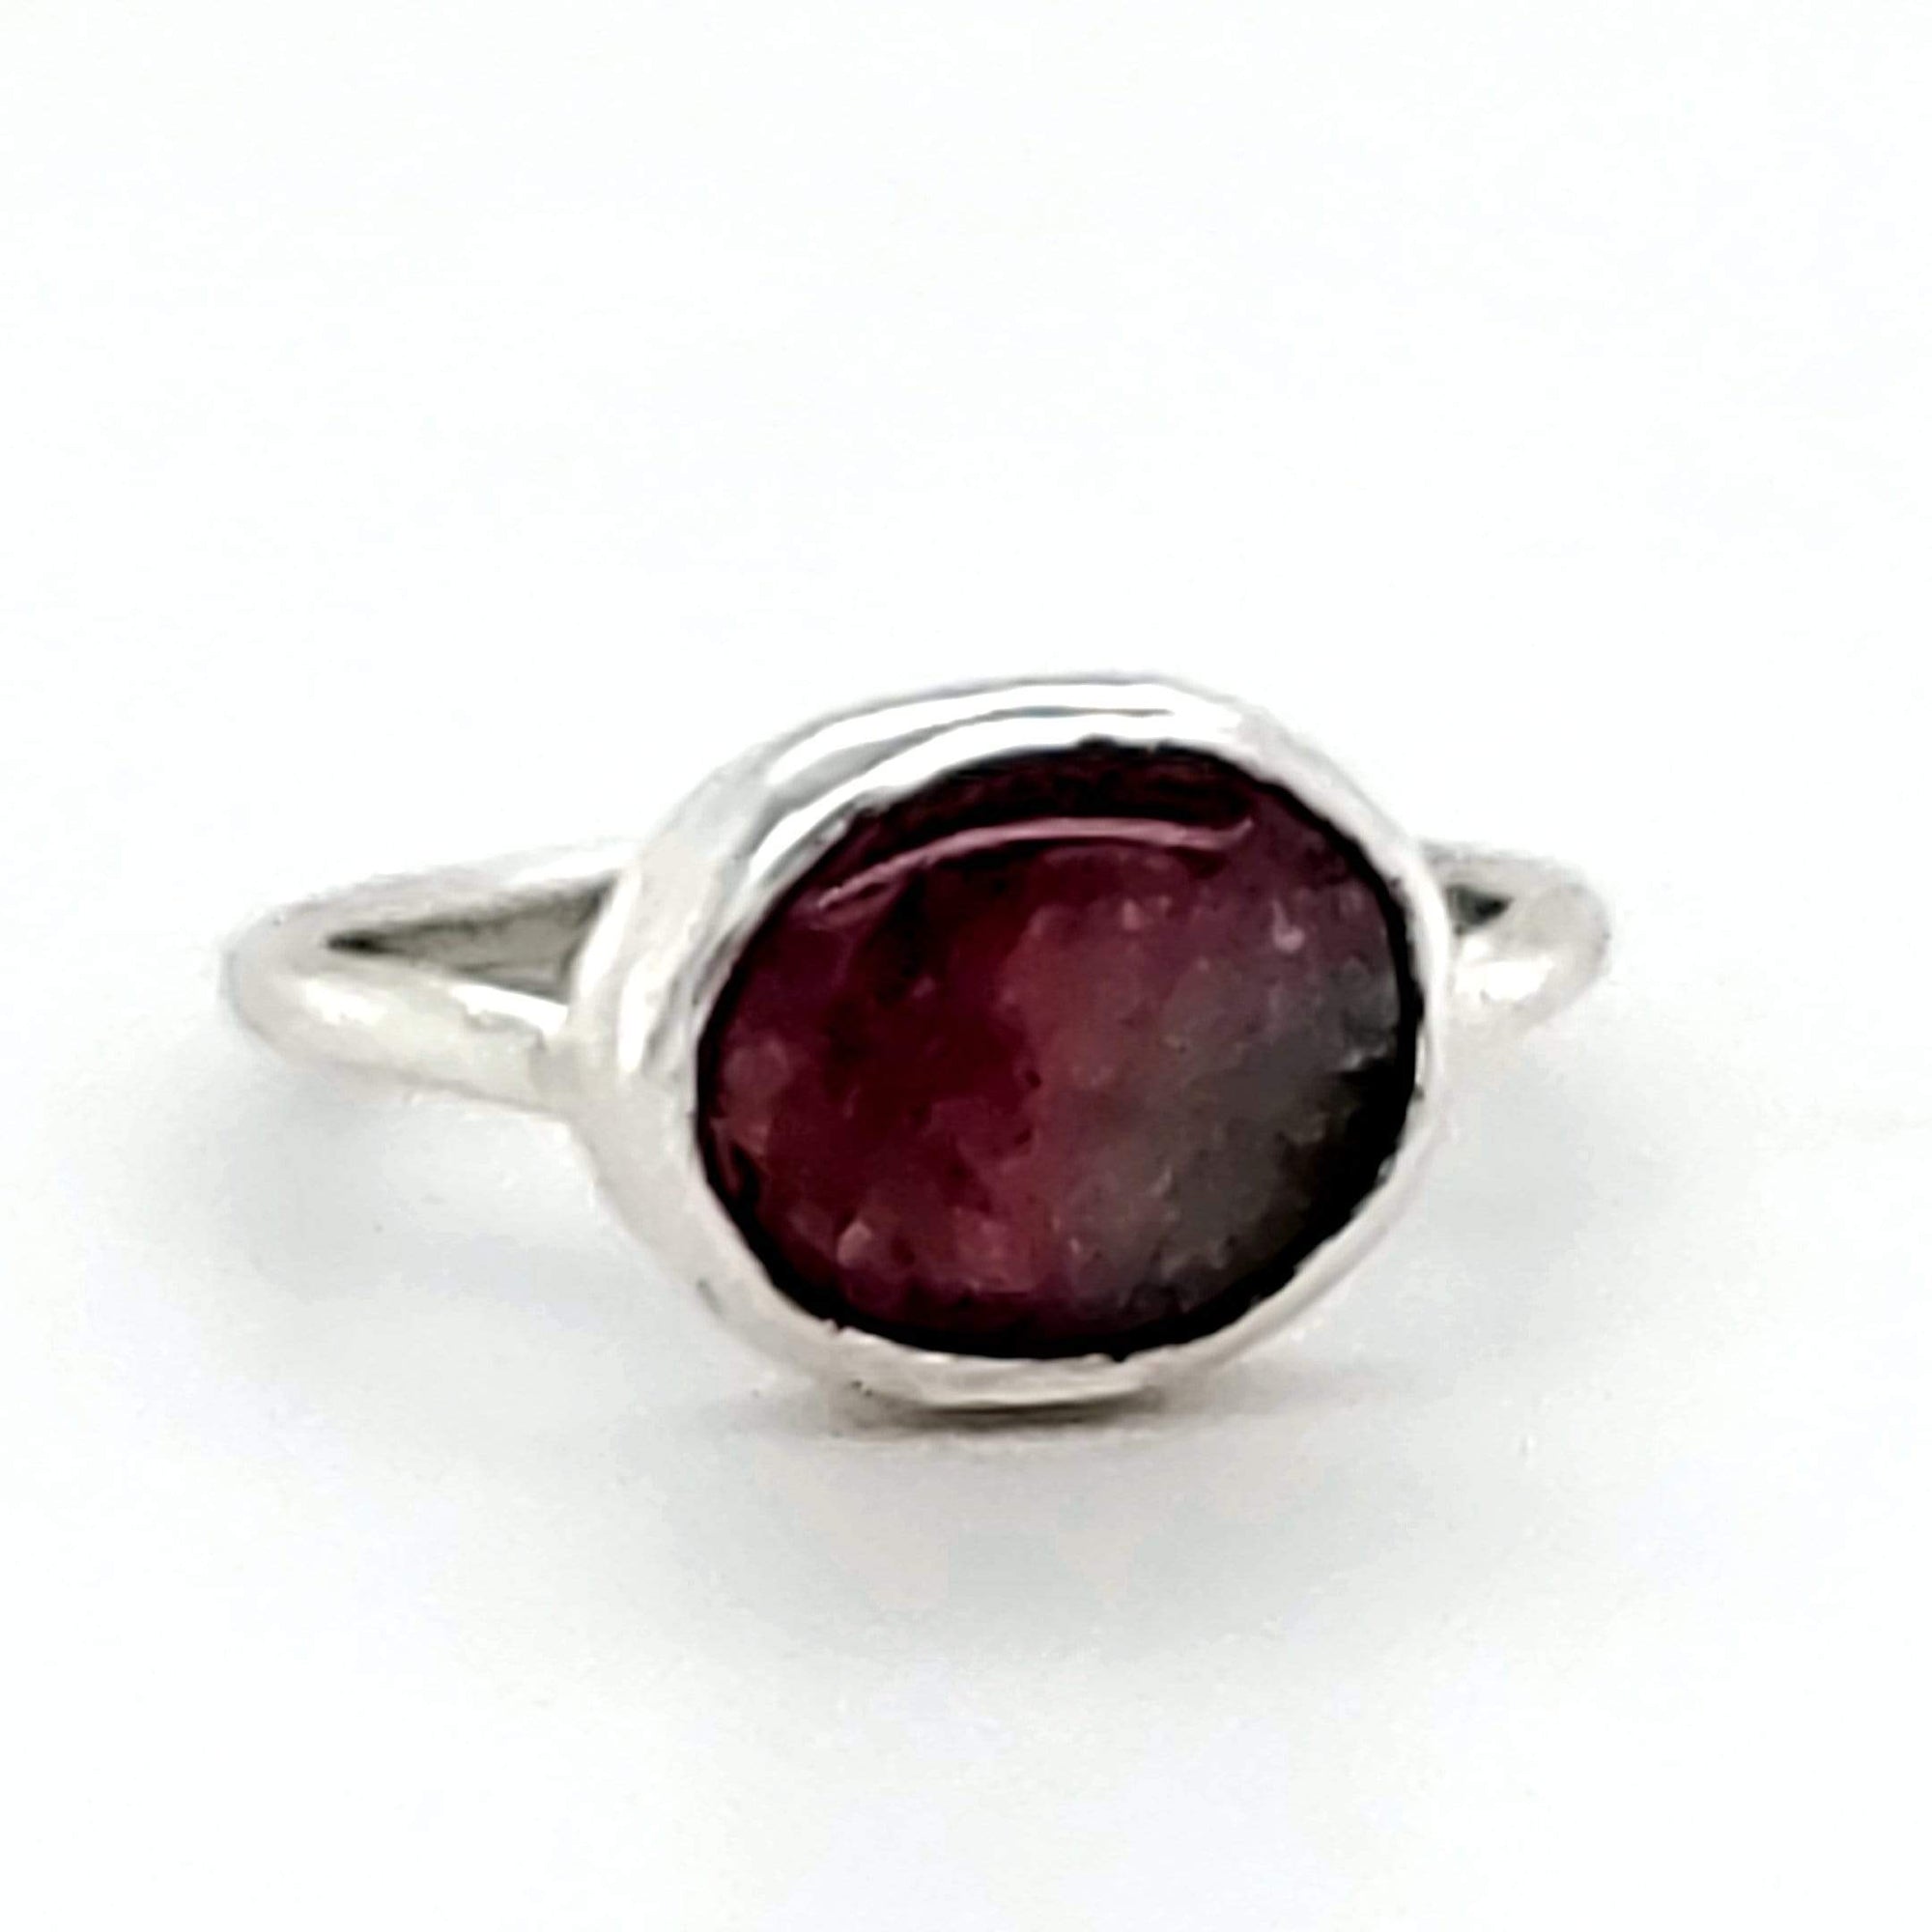 janet lasher Jewelry Rings Bi-color Oval Tourmaline Ring